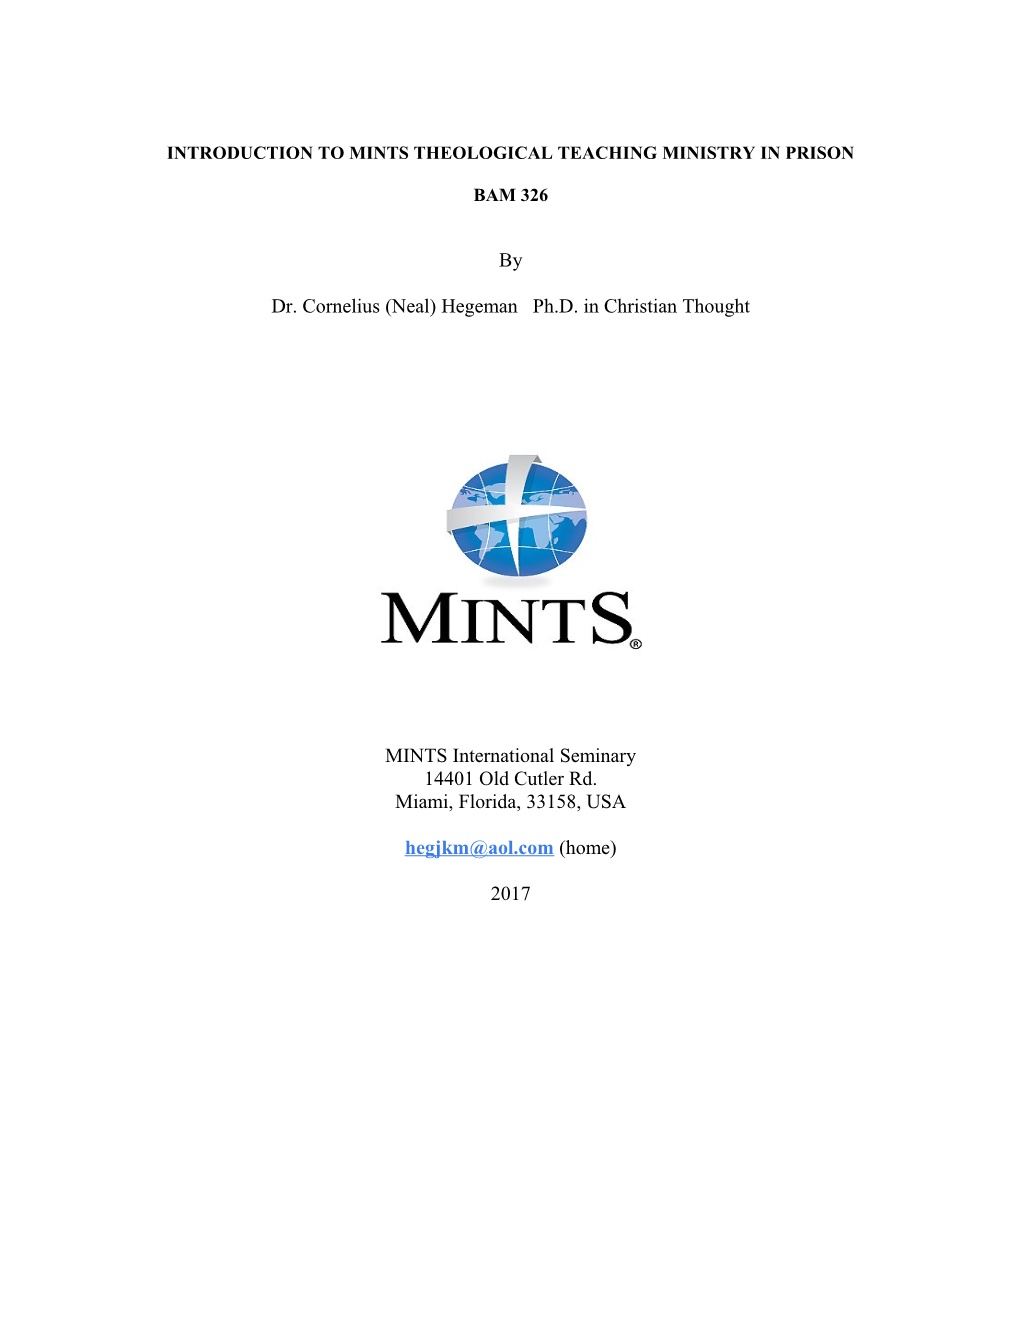 Introduction to Mints Theological Teaching Ministry in Prison